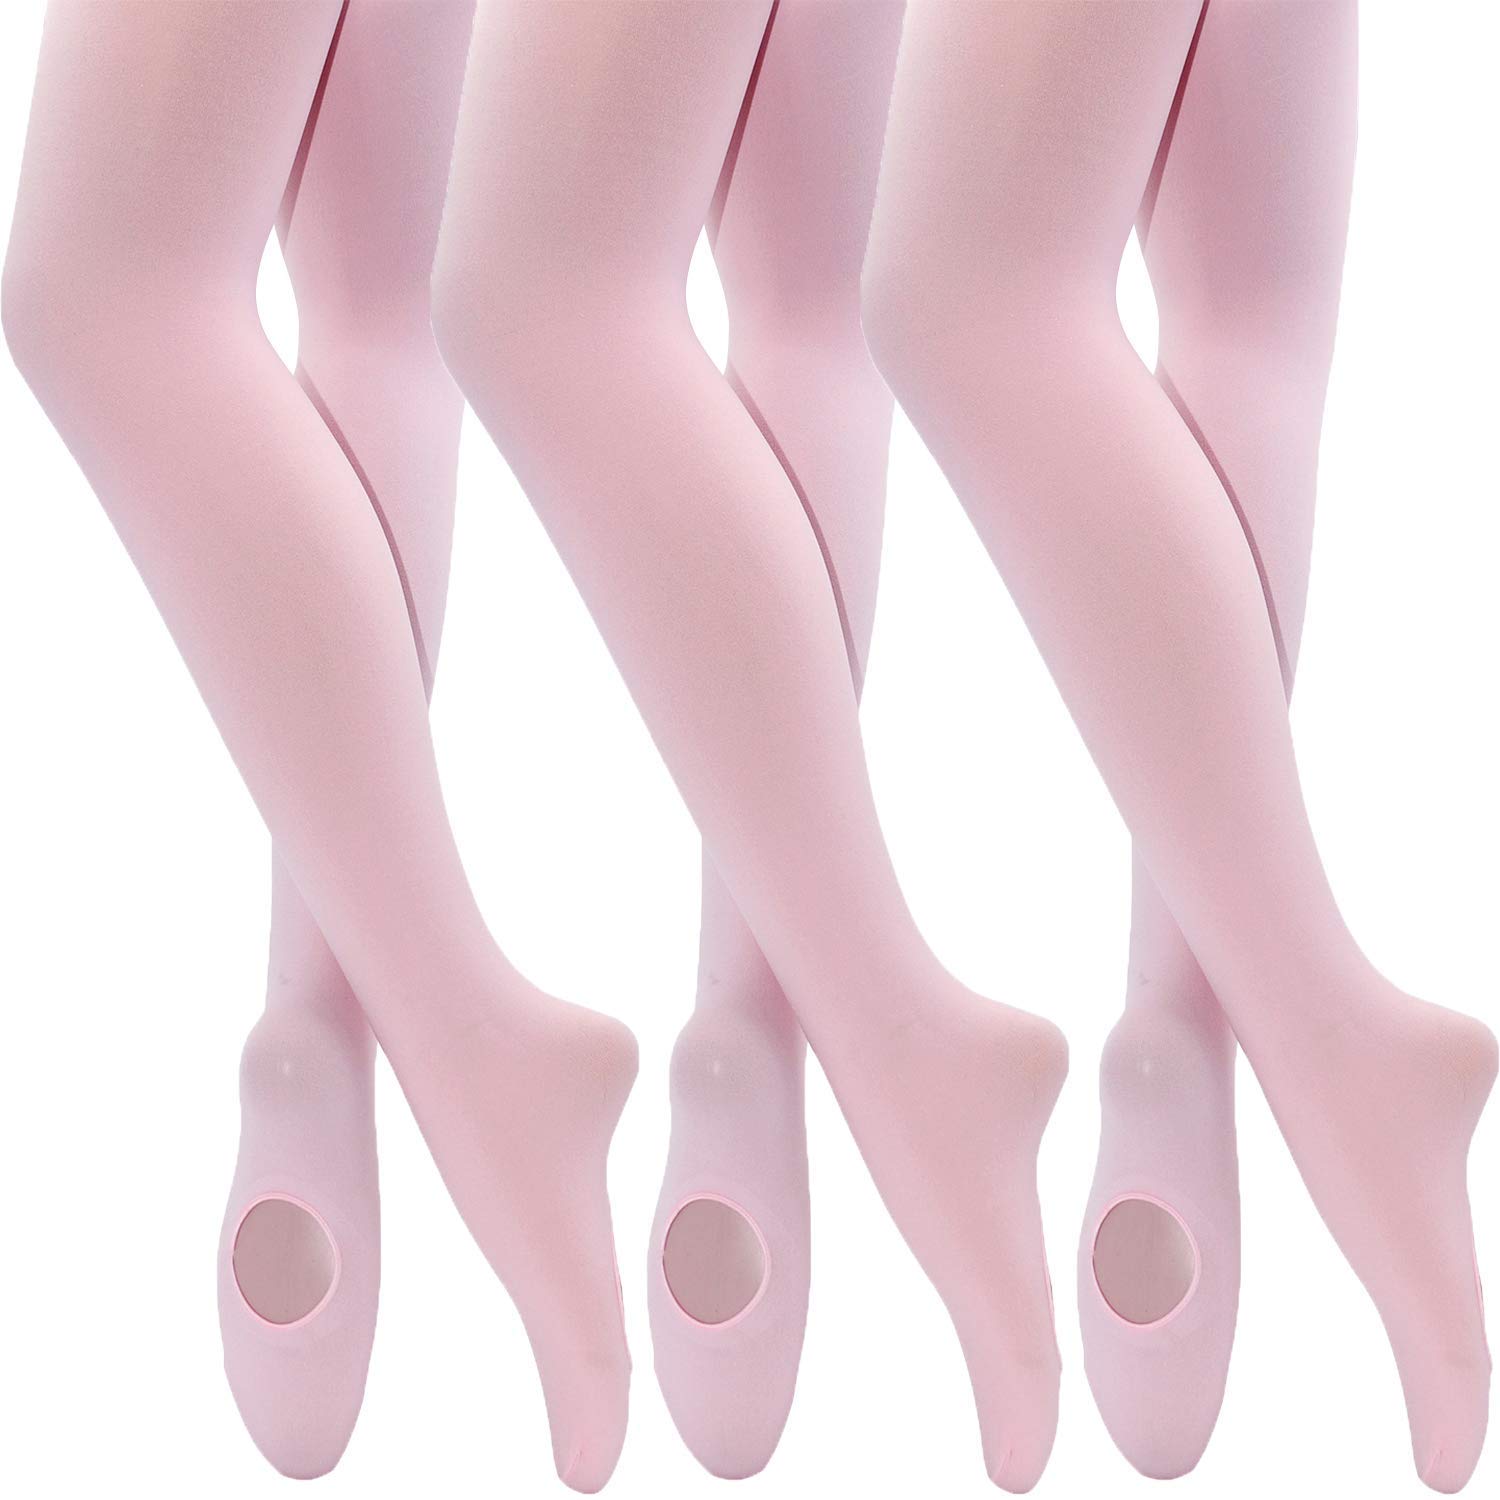 MANZI Womens Girls Solid Color Comfortable Convertible Ballet Tights 1-3 Pairs Pack